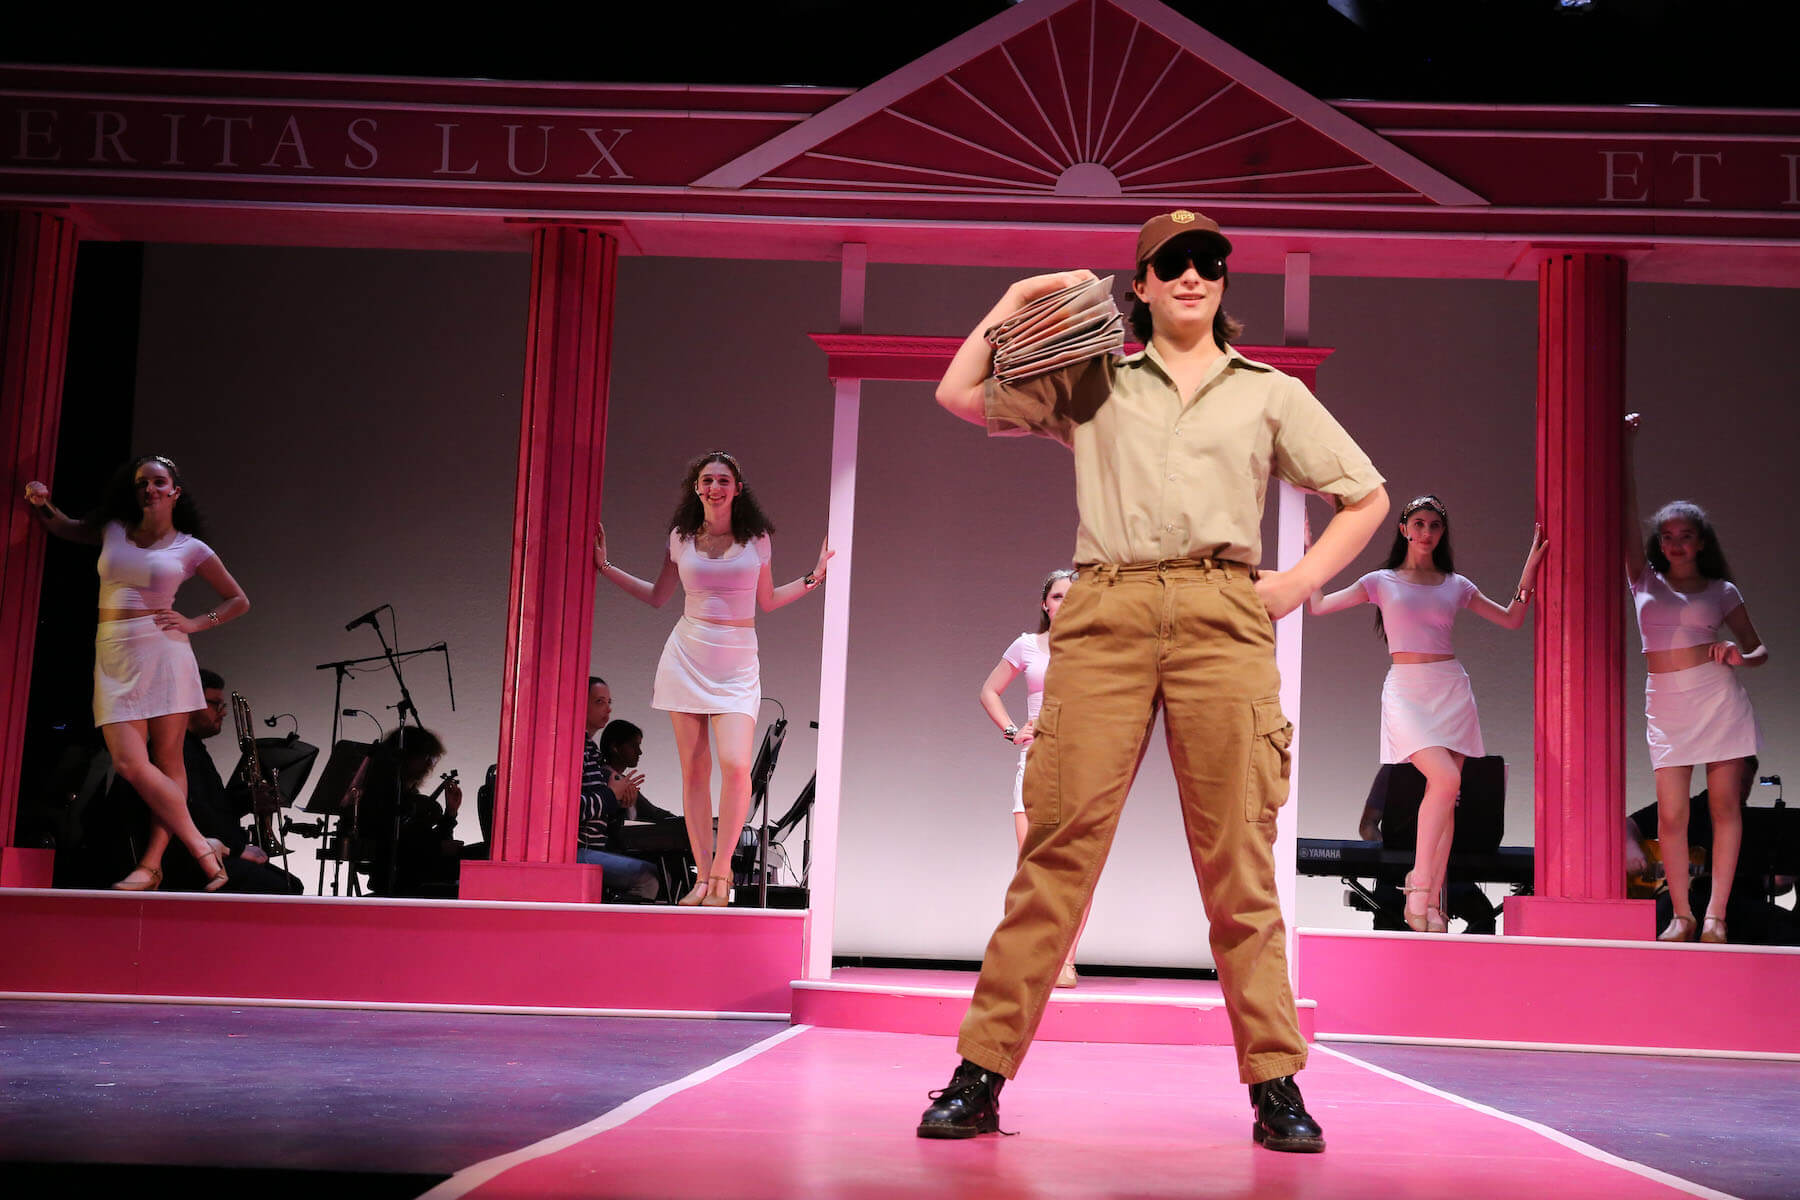 An Ethical Culture Fieldston Upper School student poses onstage in Legally Blonde.